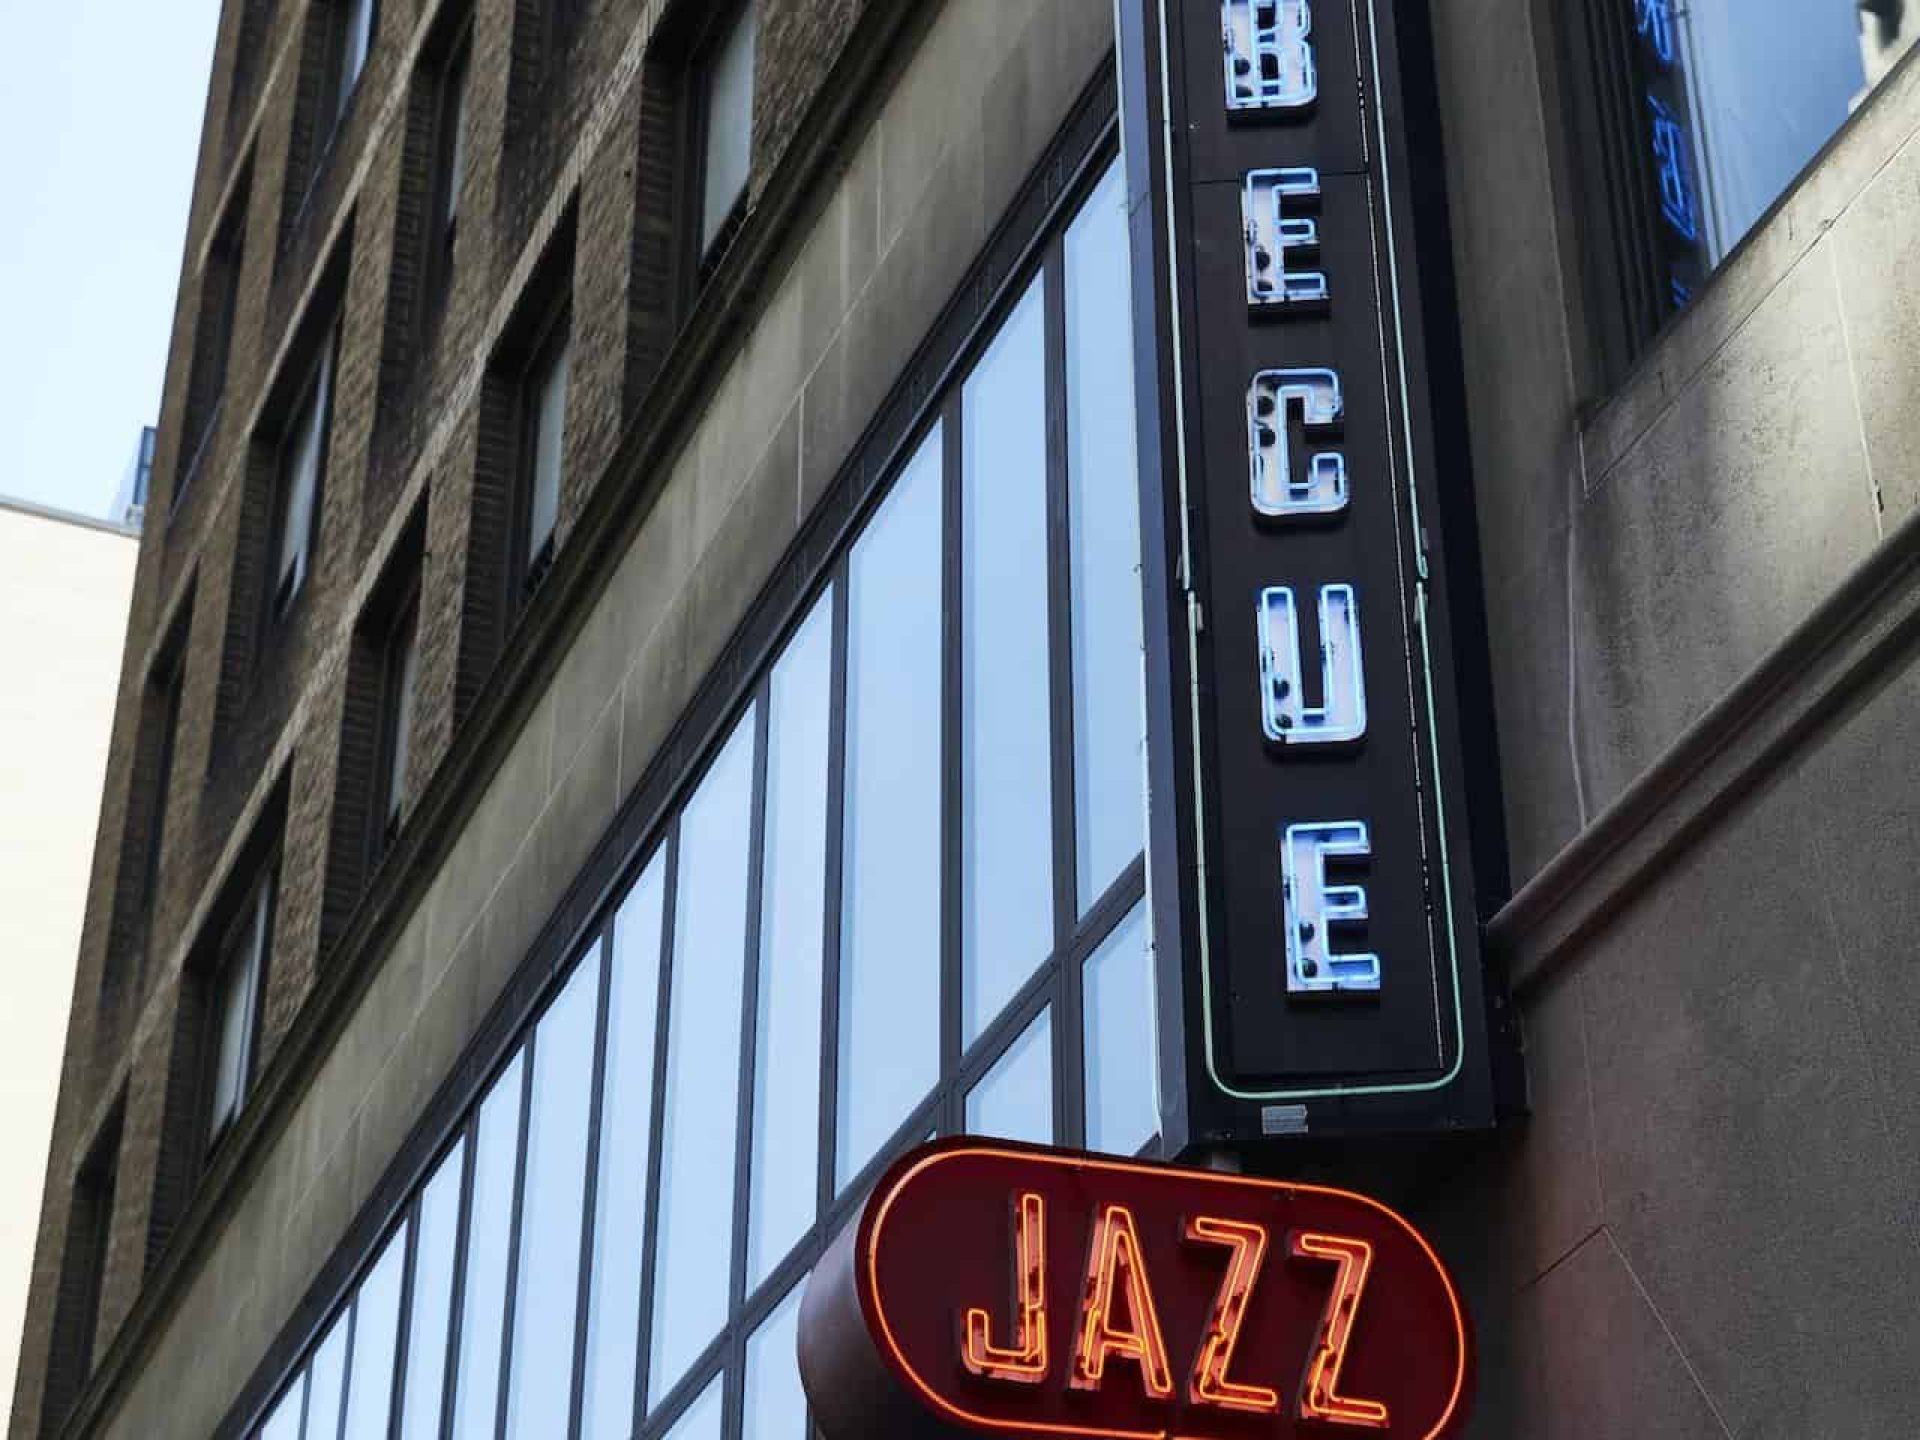 Close up of building exterior with two neon signs for "Barbecue" and "Jazz" mounted to a stone wall above building entrance.